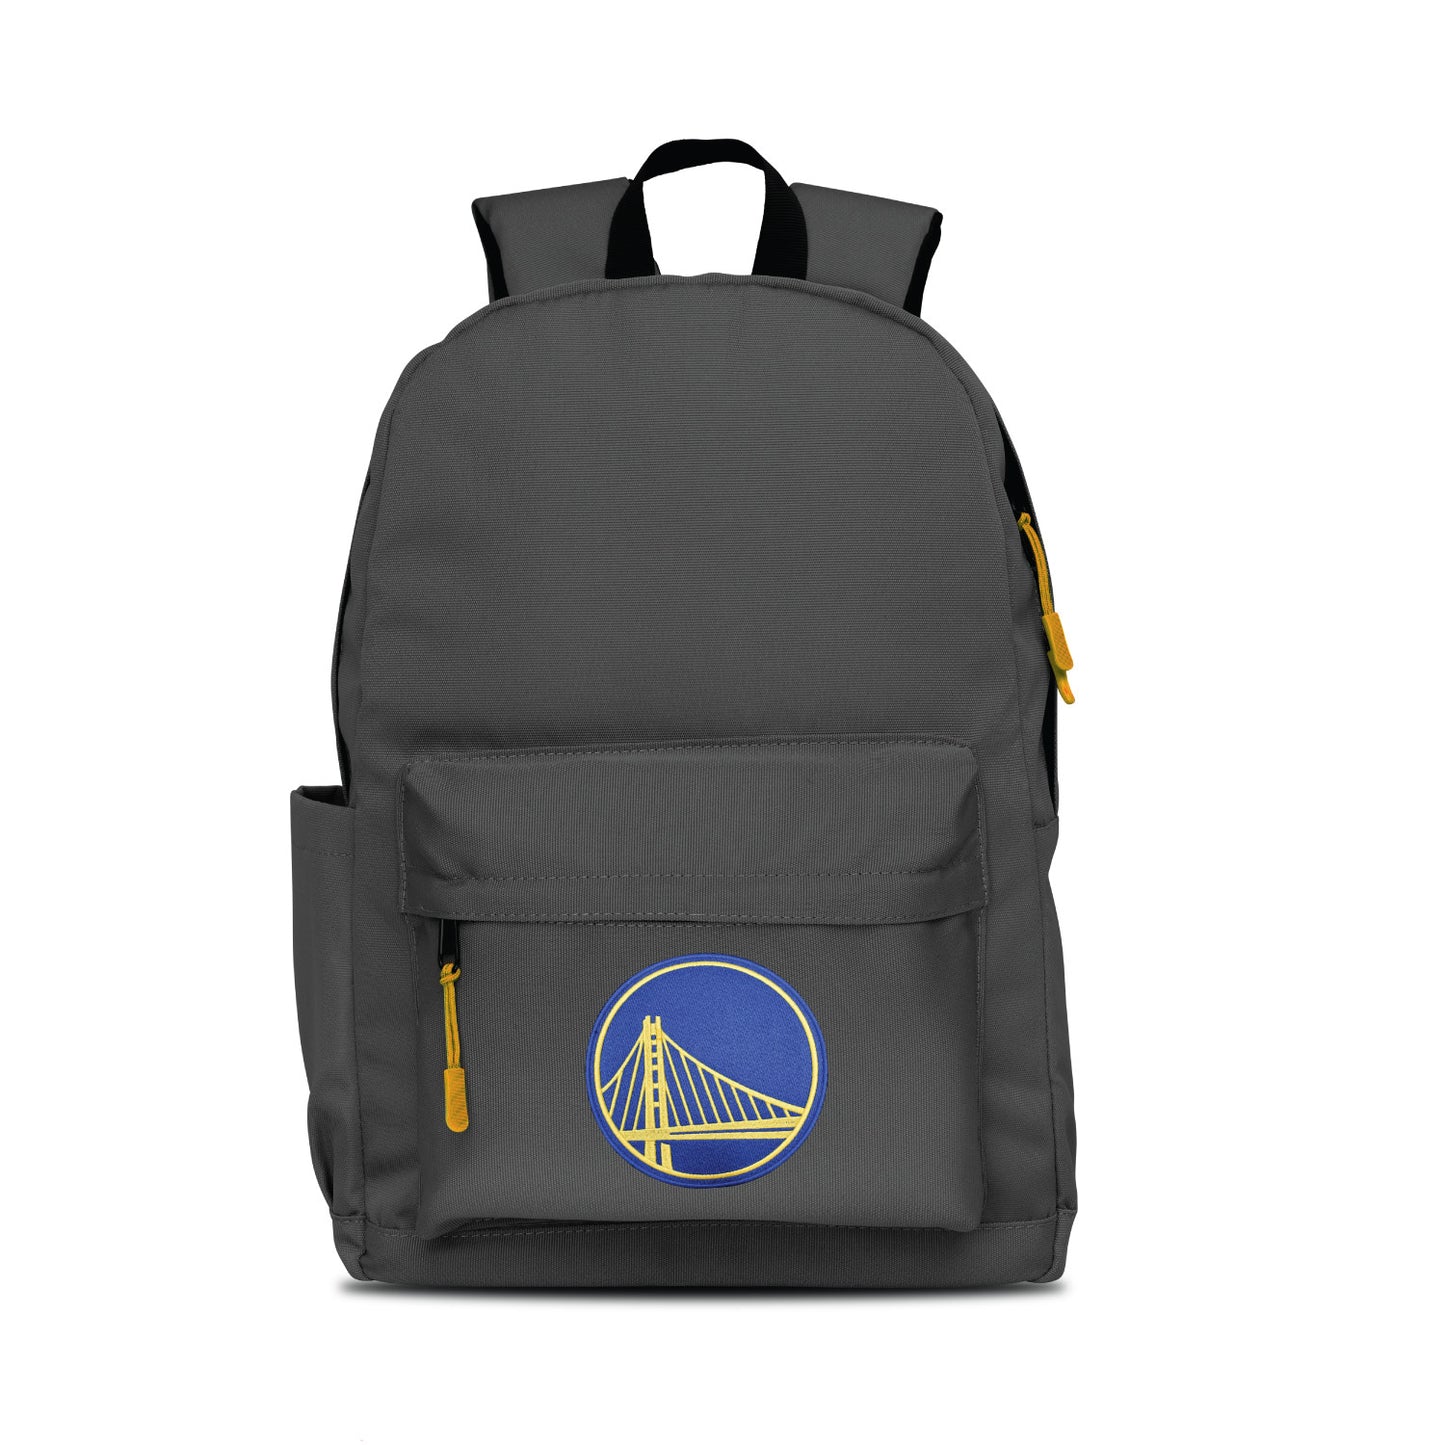 Golden State Warriors Campus Laptop Backpack - Gray